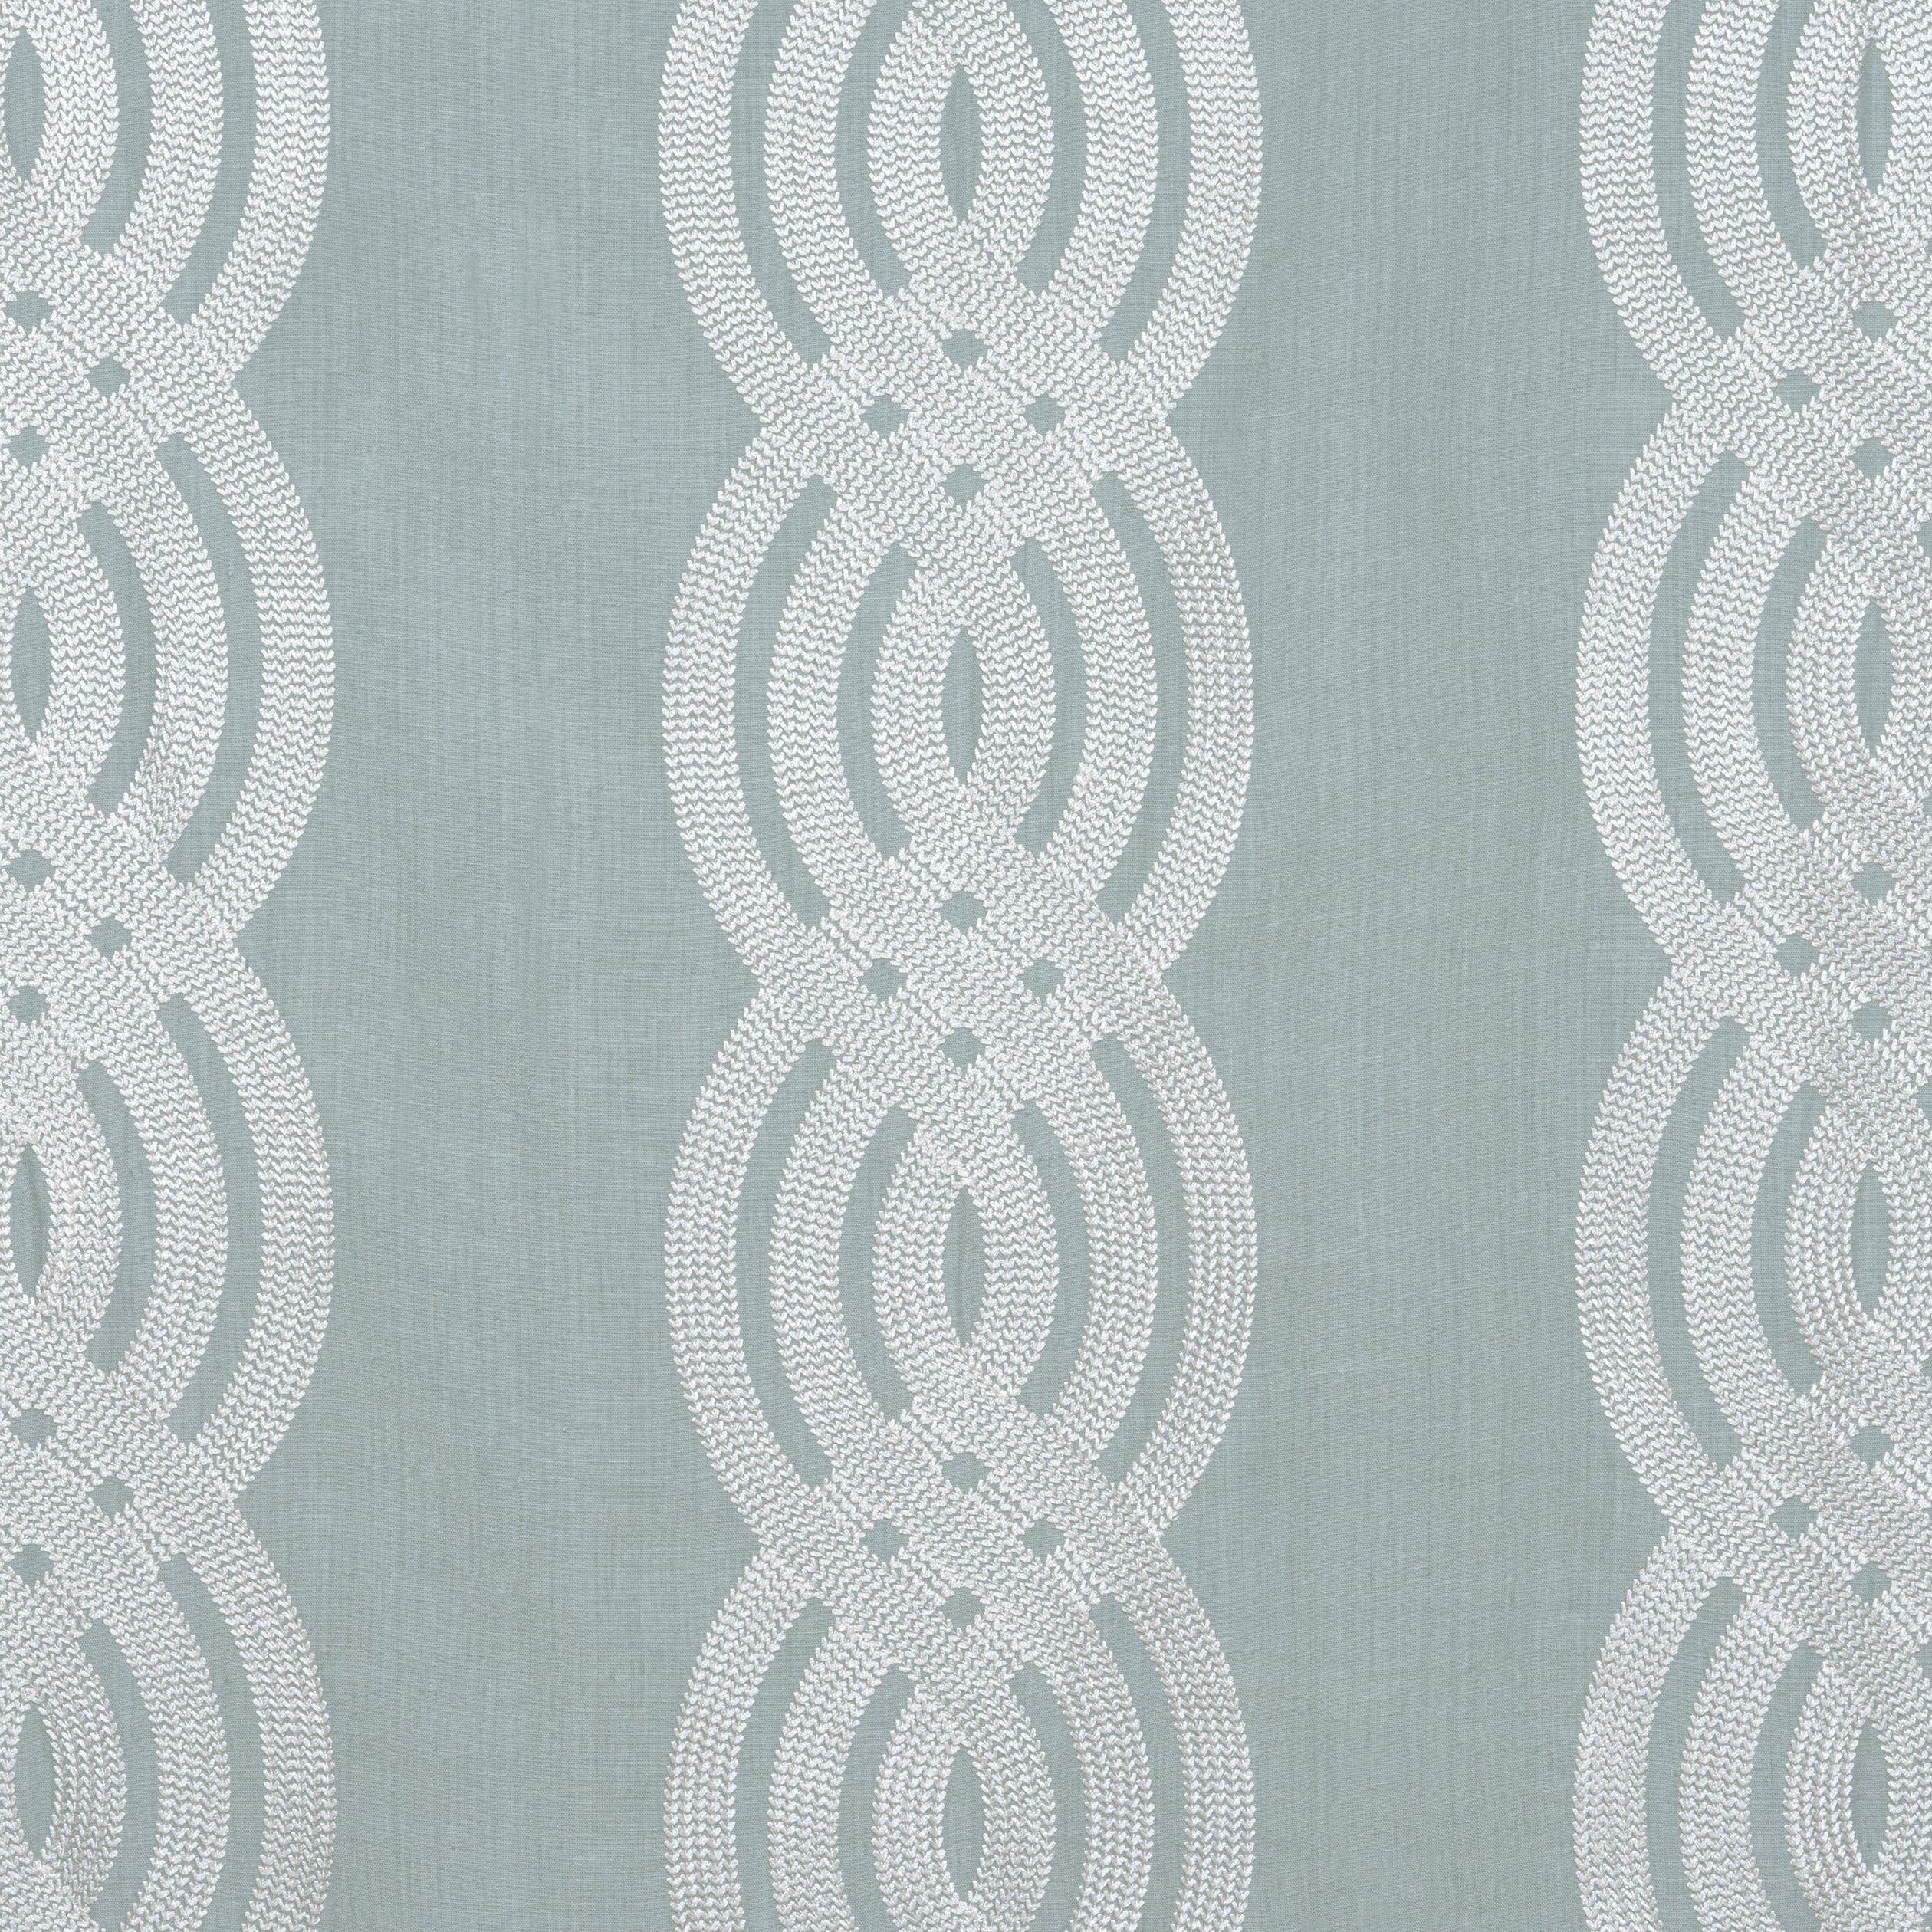 Braid Embroidery fabric in robins egg color - pattern number W710805 - by Thibaut in the Heritage collection